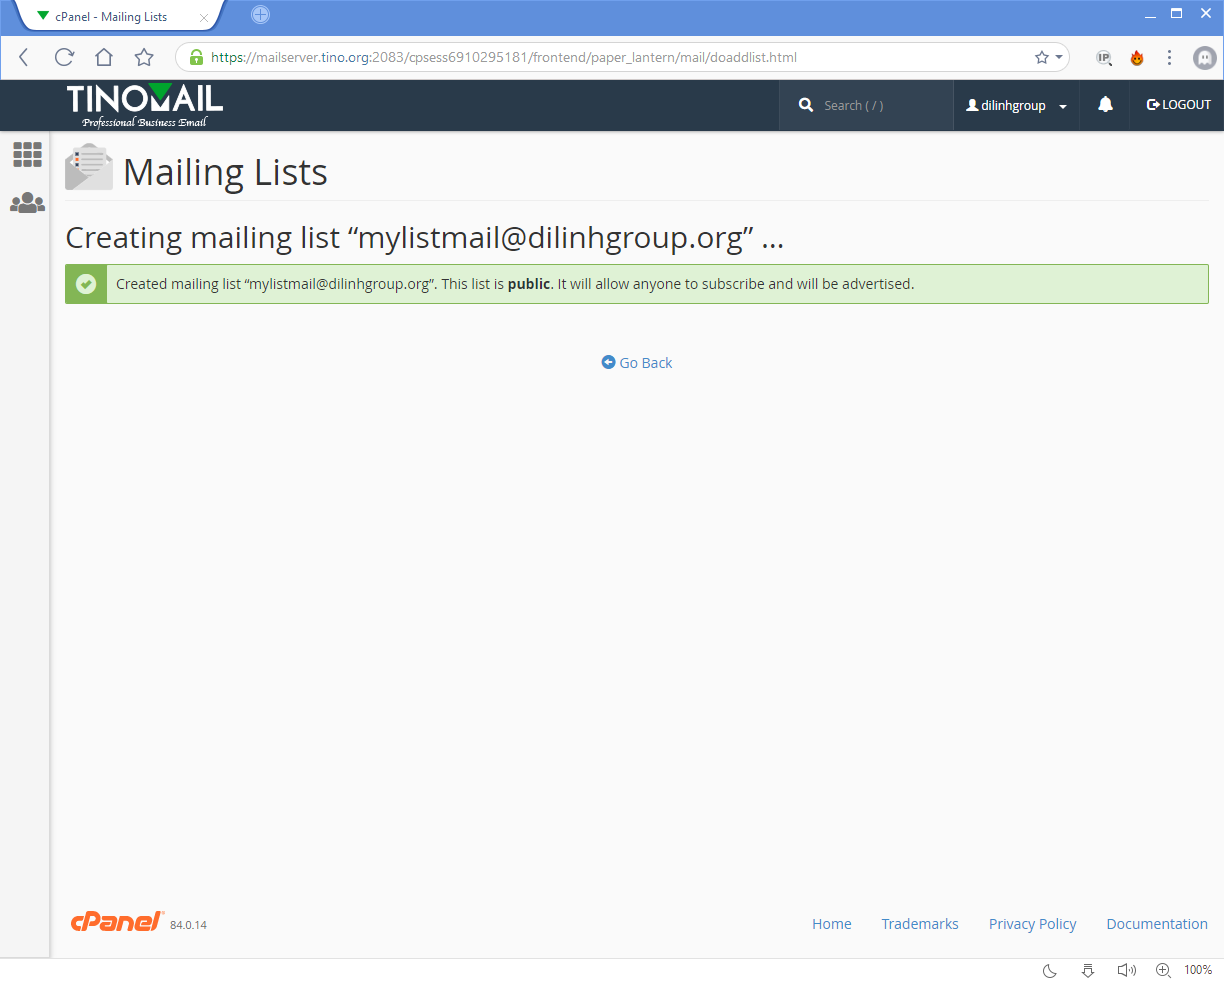 [cPanel] - Mailing Lists 16